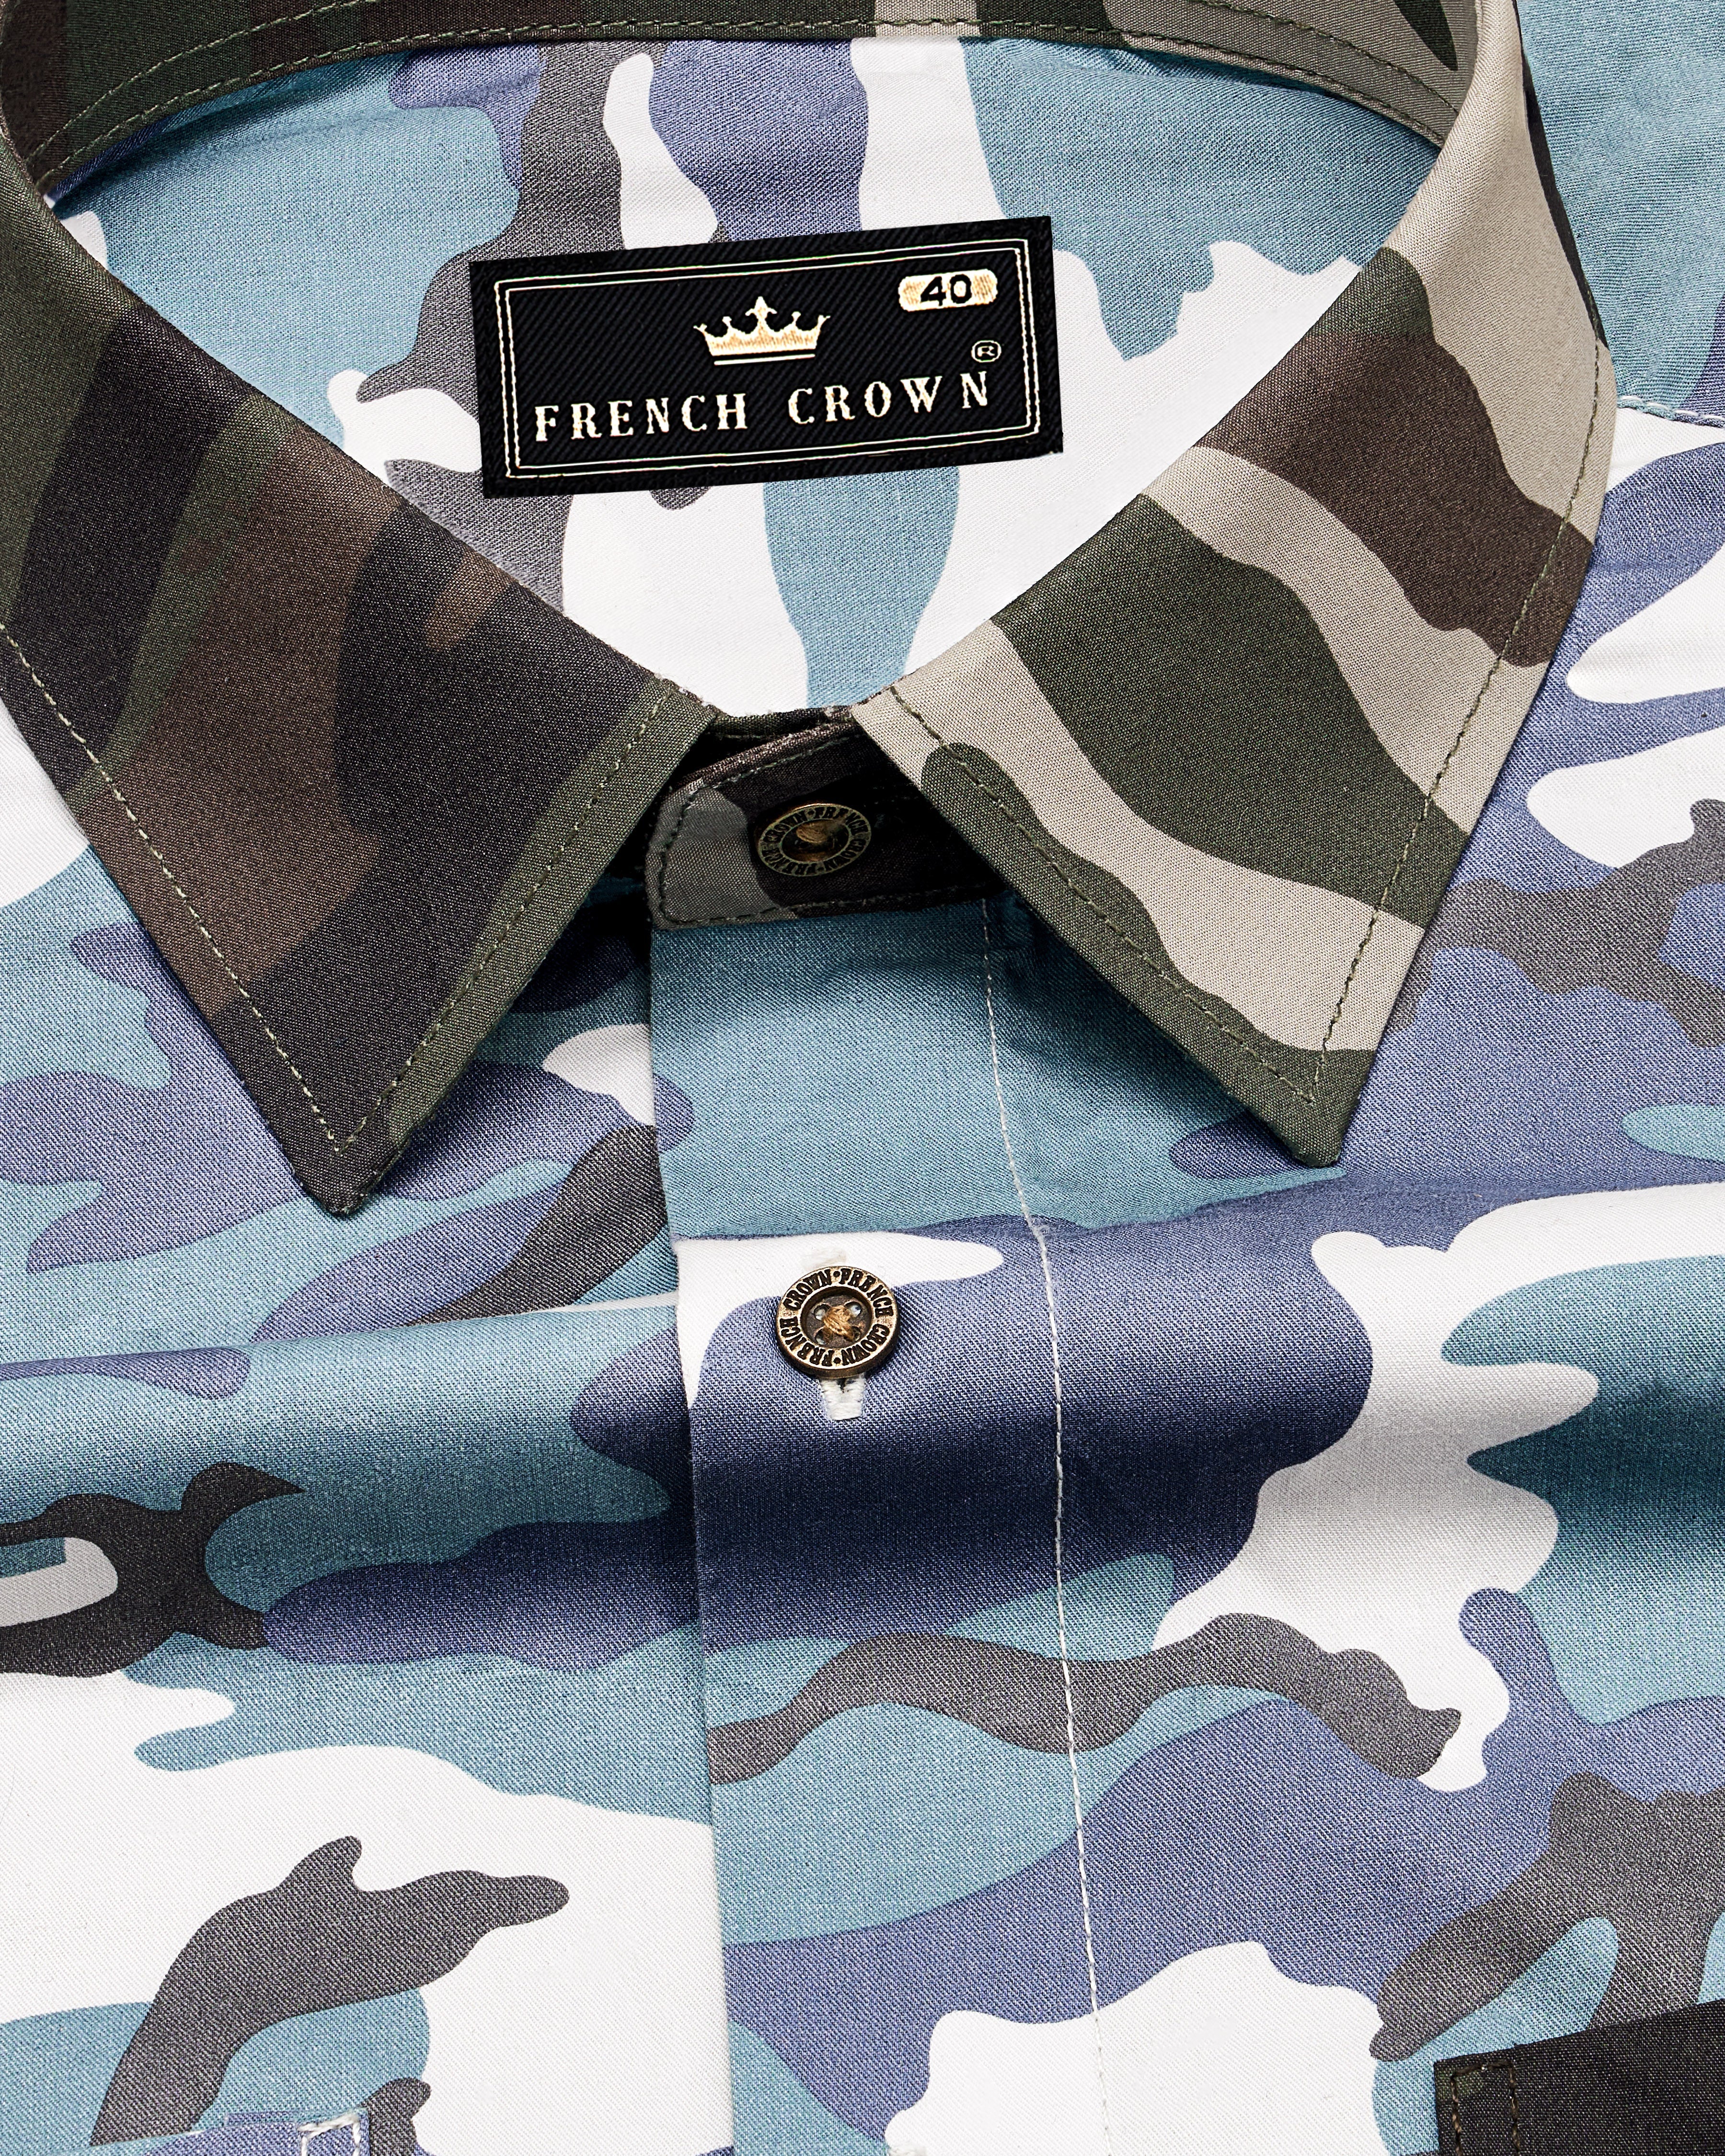 Comet Blue With Multicoloured  Camouflage Printed Royal Oxford Designer Shirt 8905-MB-P333-38, 8905-MB-P333-H-38,  8905-MB-P333-39,  8905-MB-P333-H-39,  8905-MB-P333-40,  8905-MB-P333-H-40,  8905-MB-P333-42,  8905-MB-P333-H-42,  8905-MB-P333-44,  8905-MB-P333-H-44,  8905-MB-P333-46,  8905-MB-P333-H-46,  8905-MB-P333-48,  8905-MB-P333-H-48,  8905-MB-P333-50,  8905-MB-P333-H-50,  8905-MB-P333-52,  8905-MB-P333-H-52